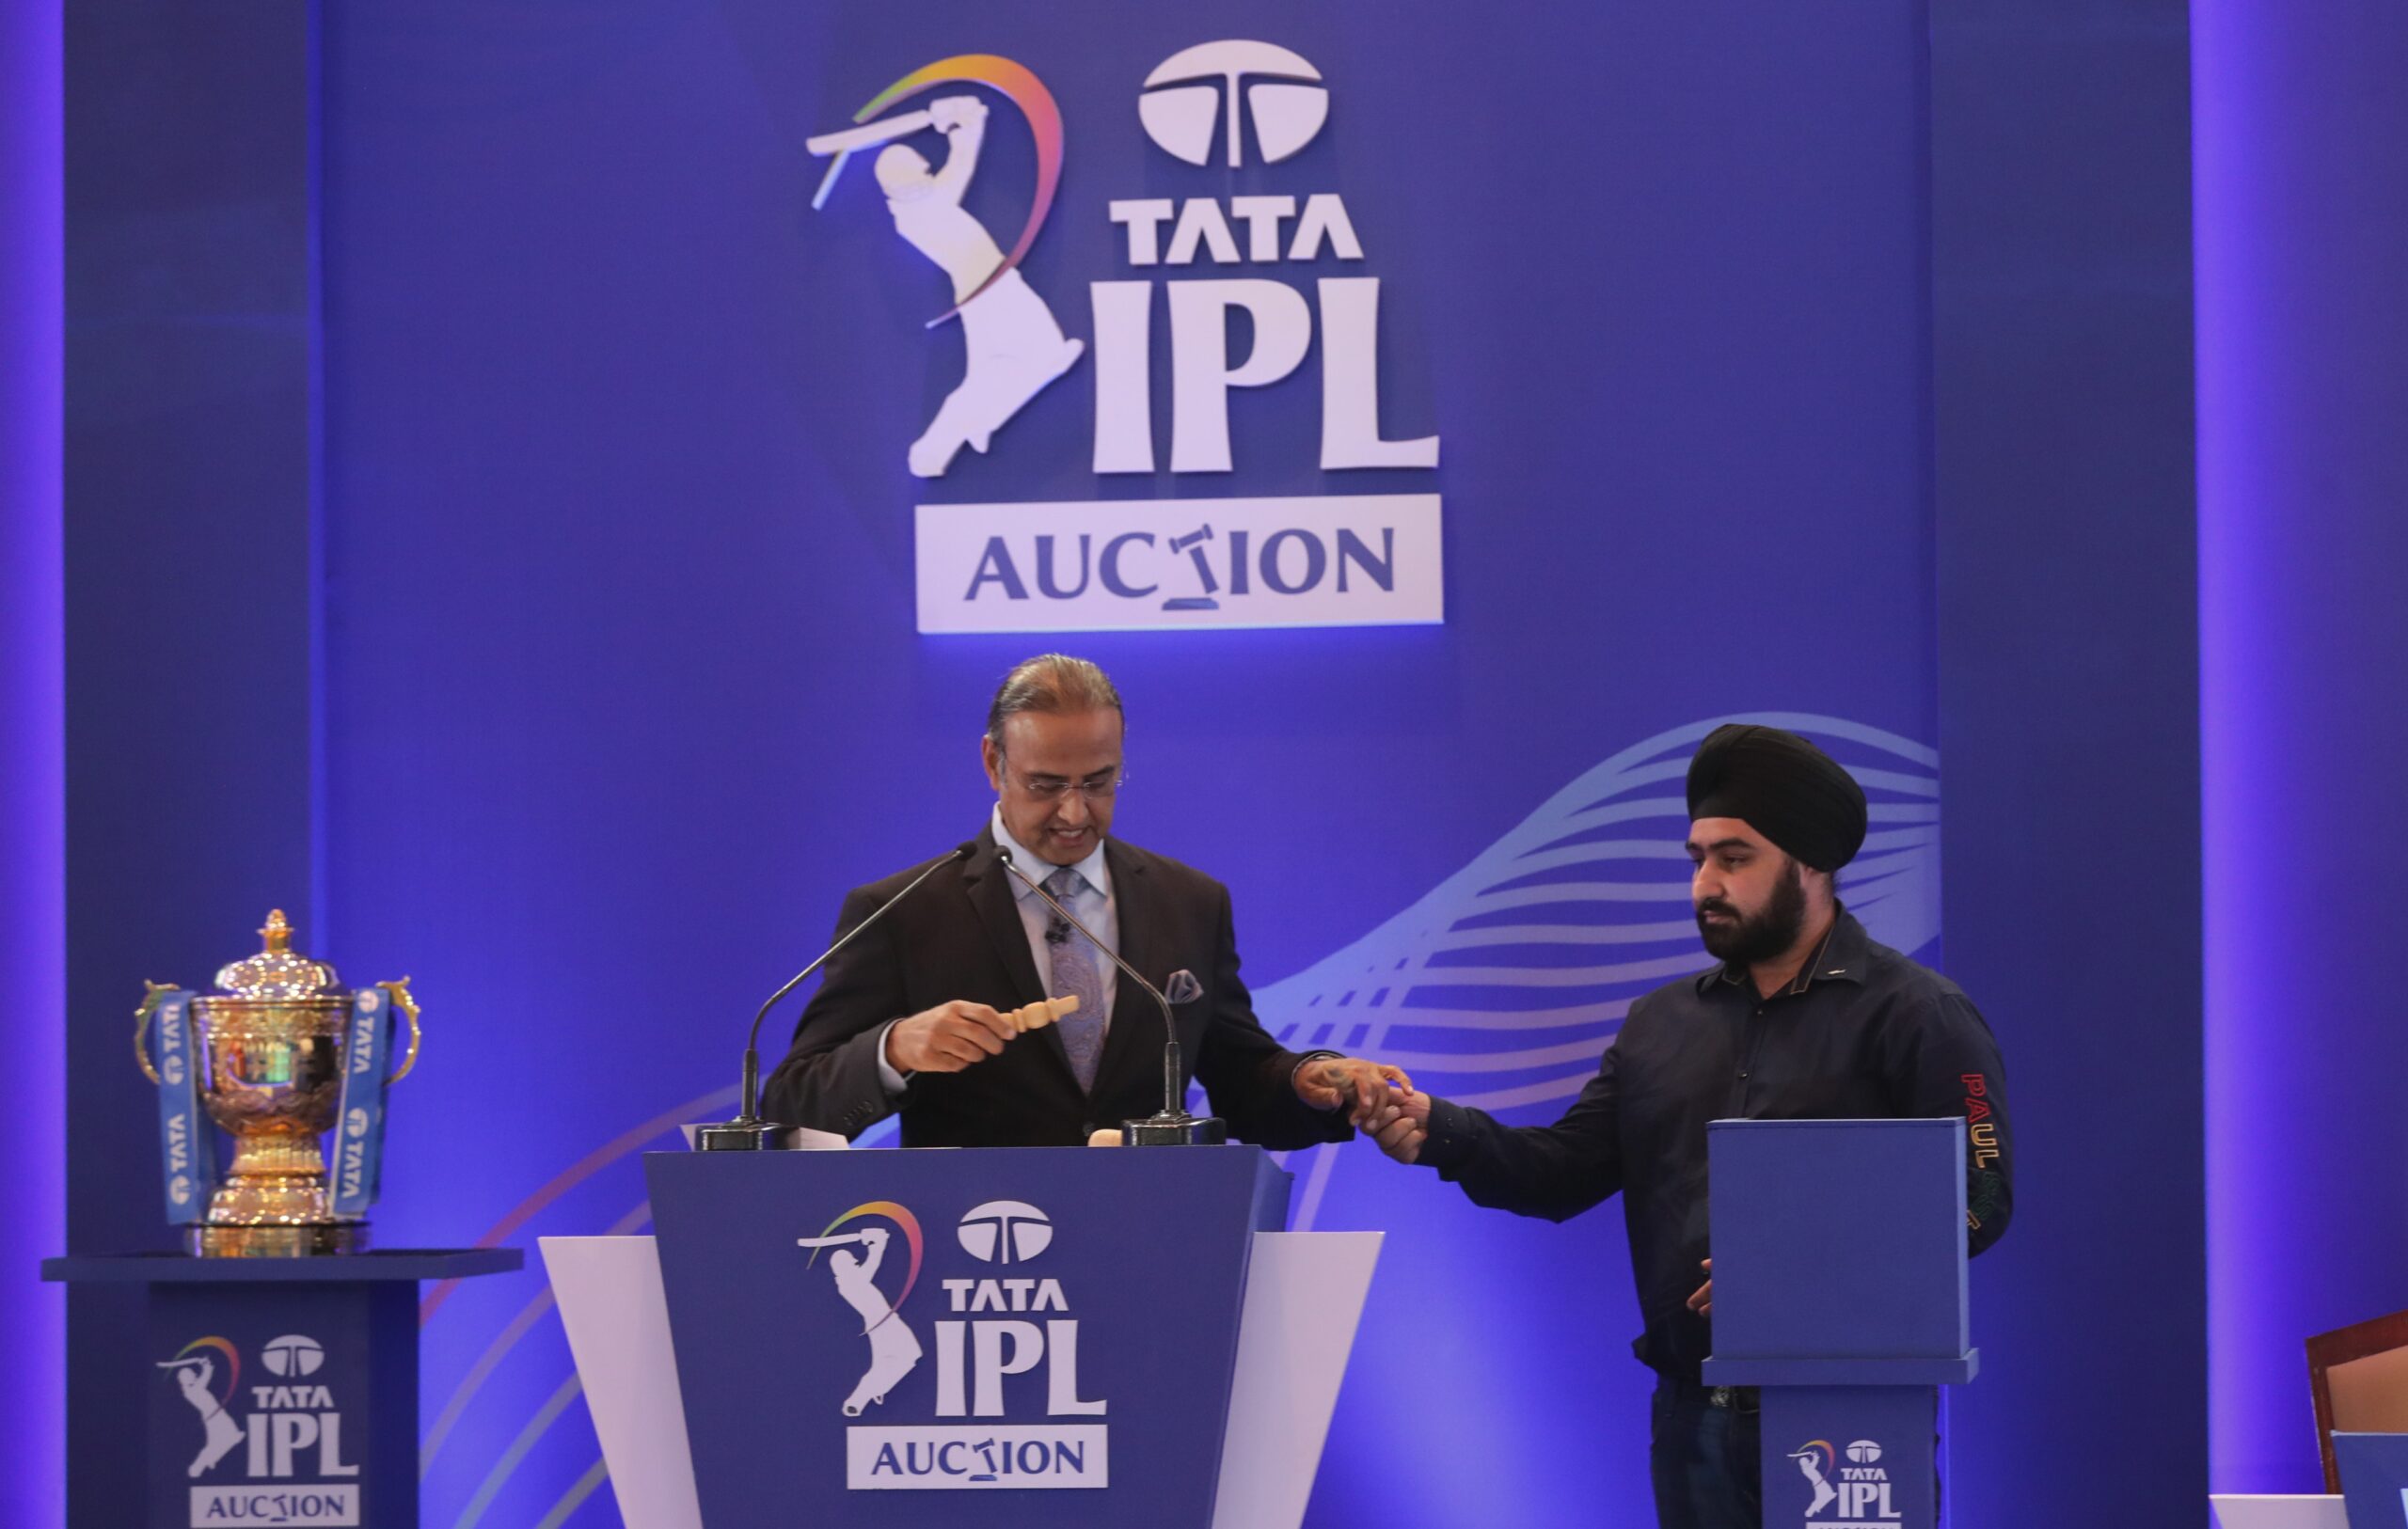 IPL Auction 2022 Live Streaming Day 2 When And Where To Watch Day 2 Of IPL Auction 2022 Live In Your Country